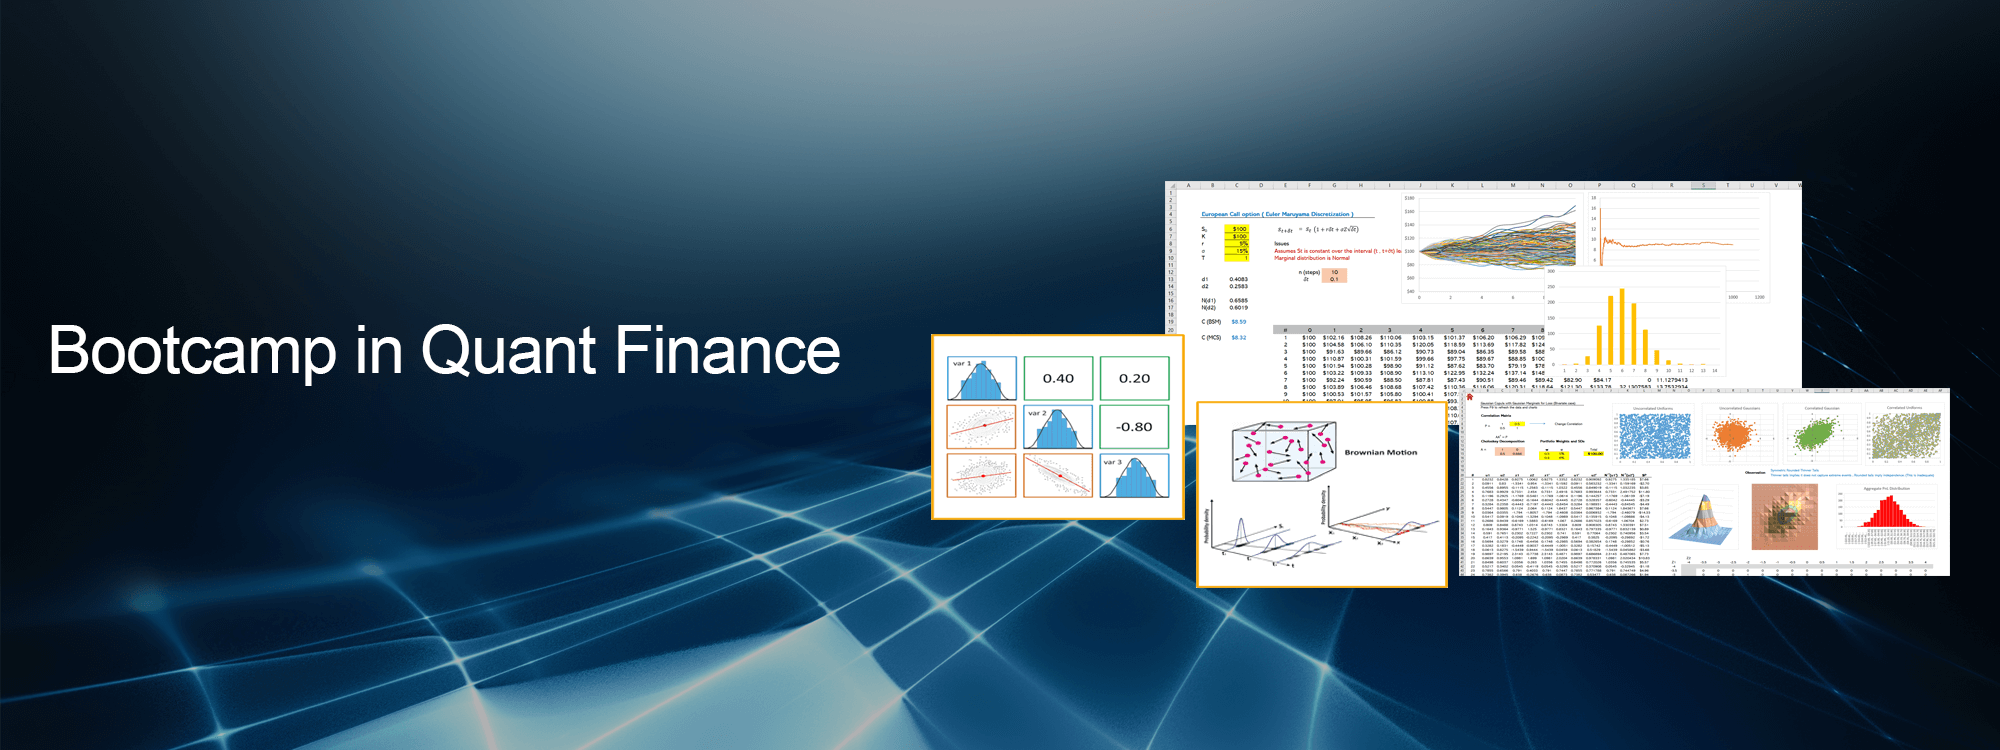 BOOTCAMP IN QUANT FINANCE